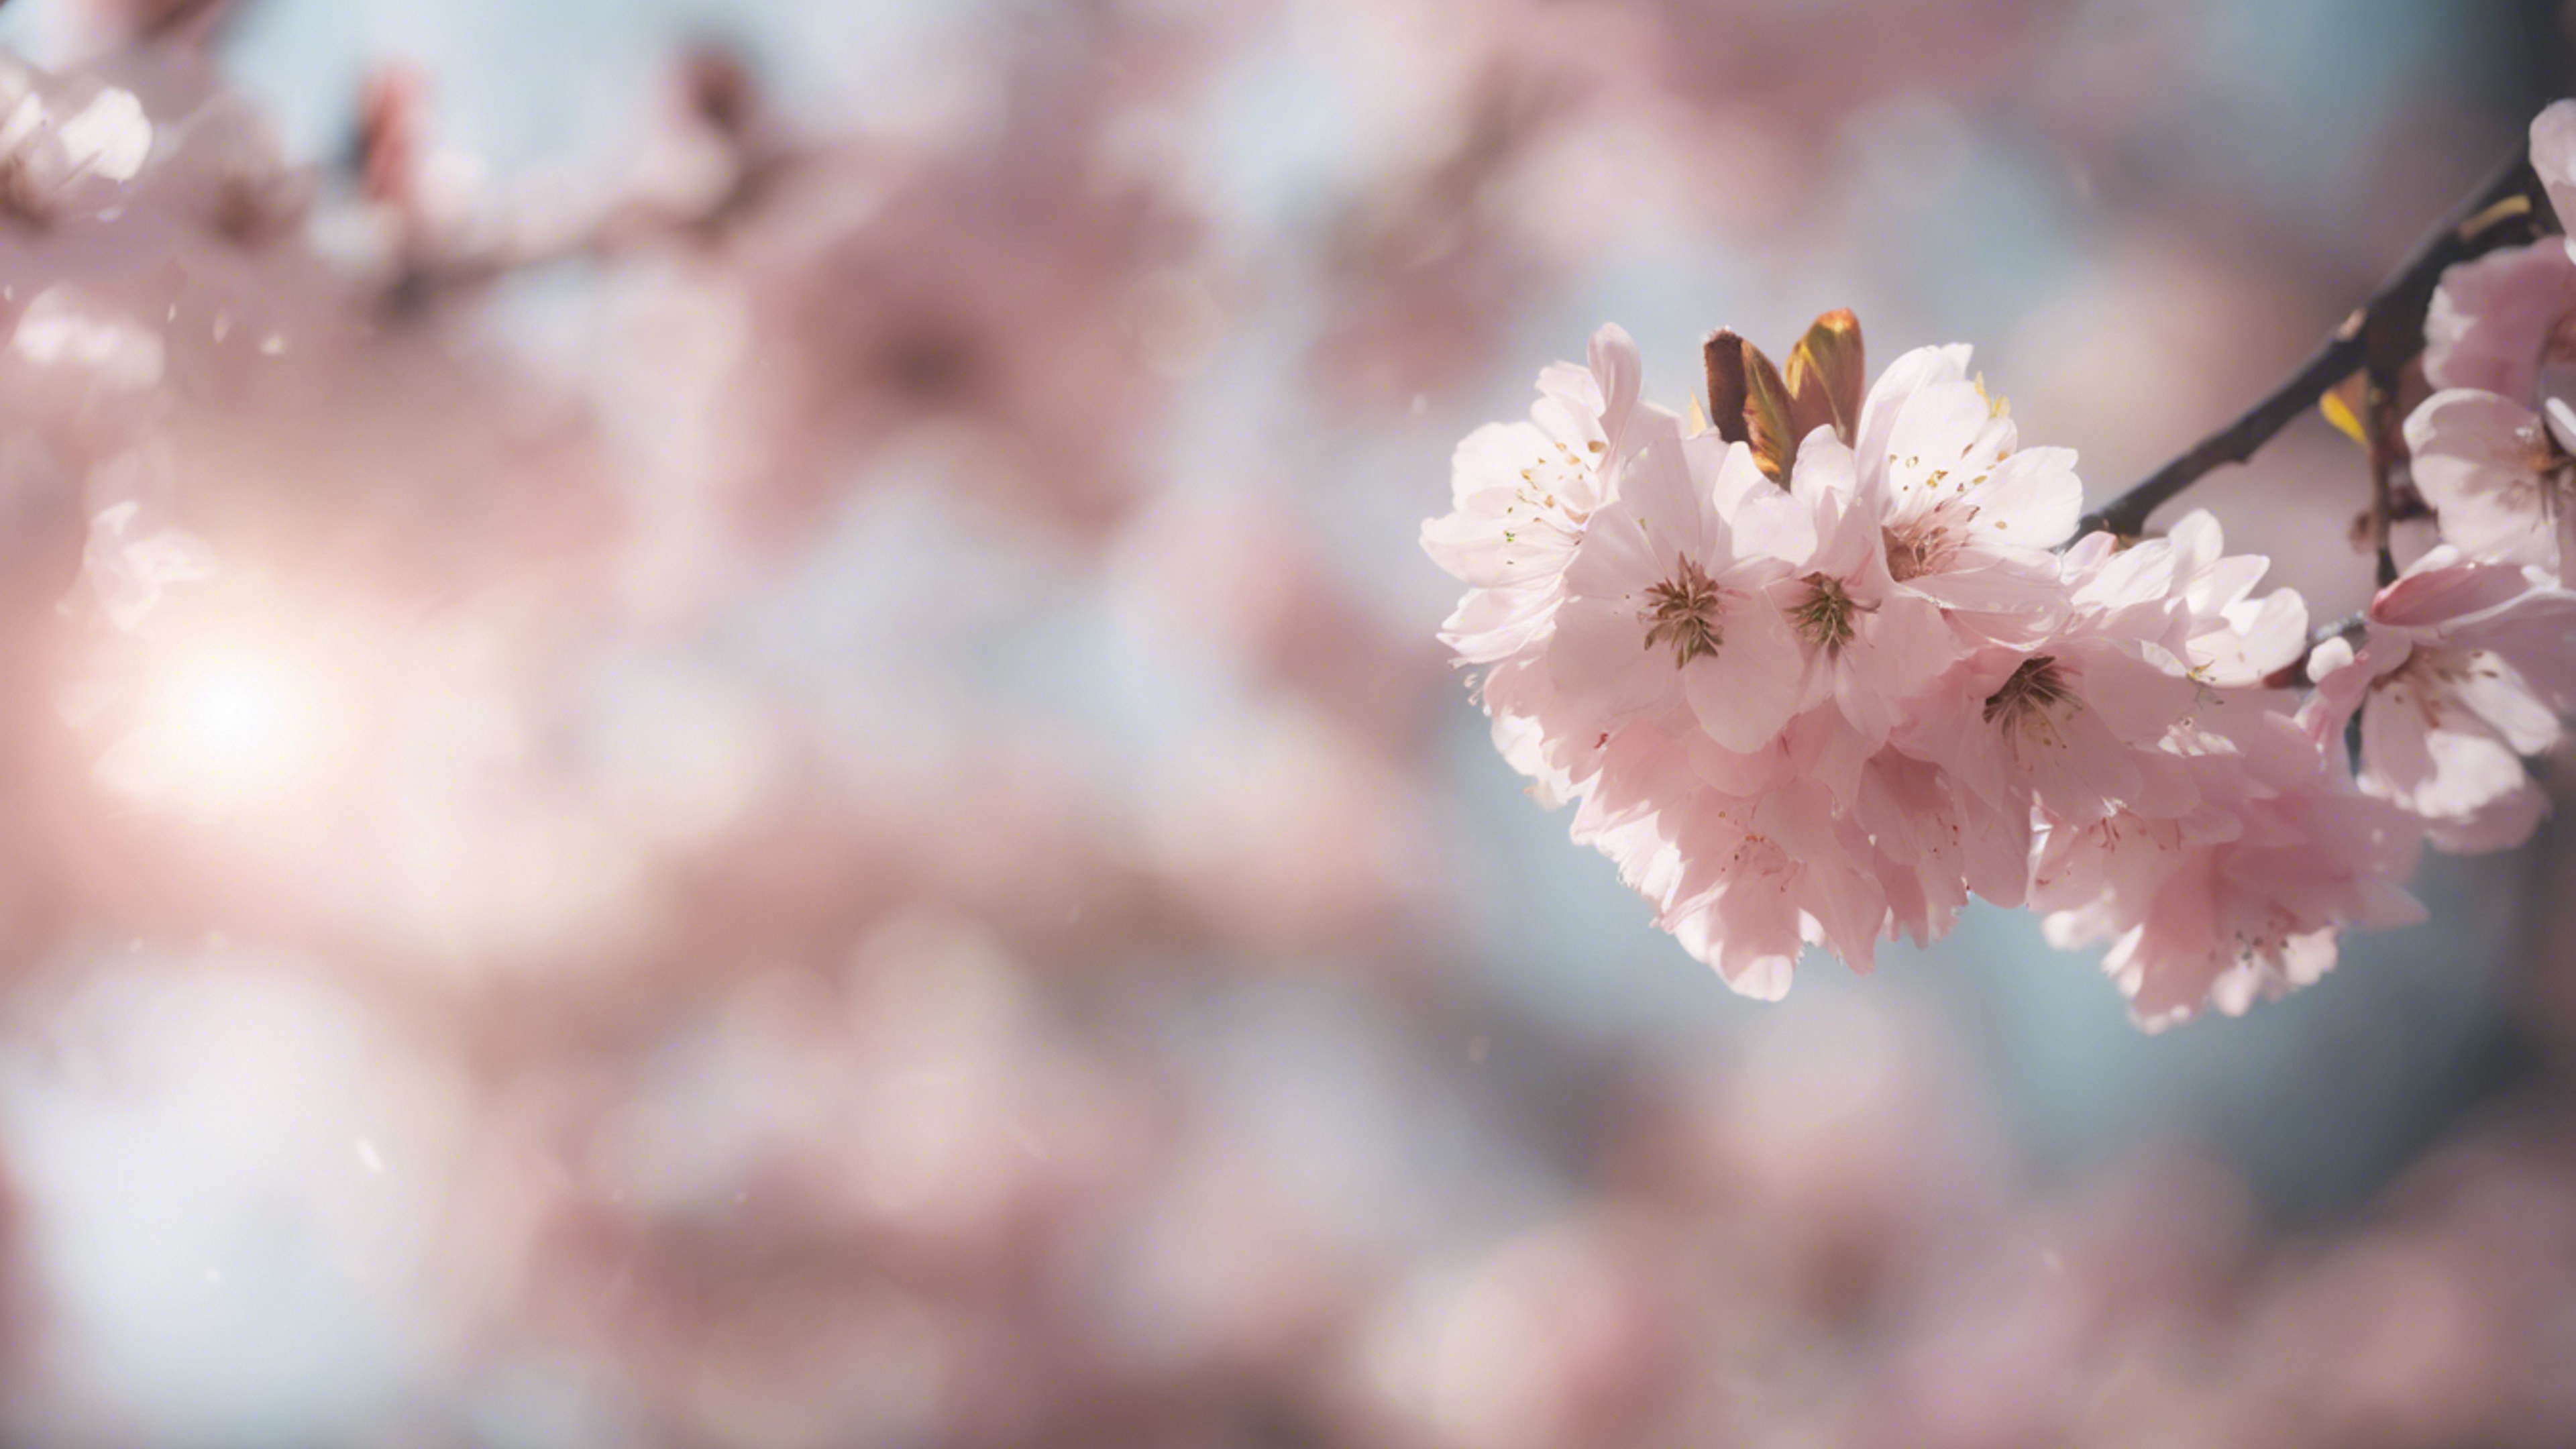 An ethereal dreamscape featuring cherry blossoms wafting in the soft spring breeze. Обои[9de2e4f1deeb467ebab6]